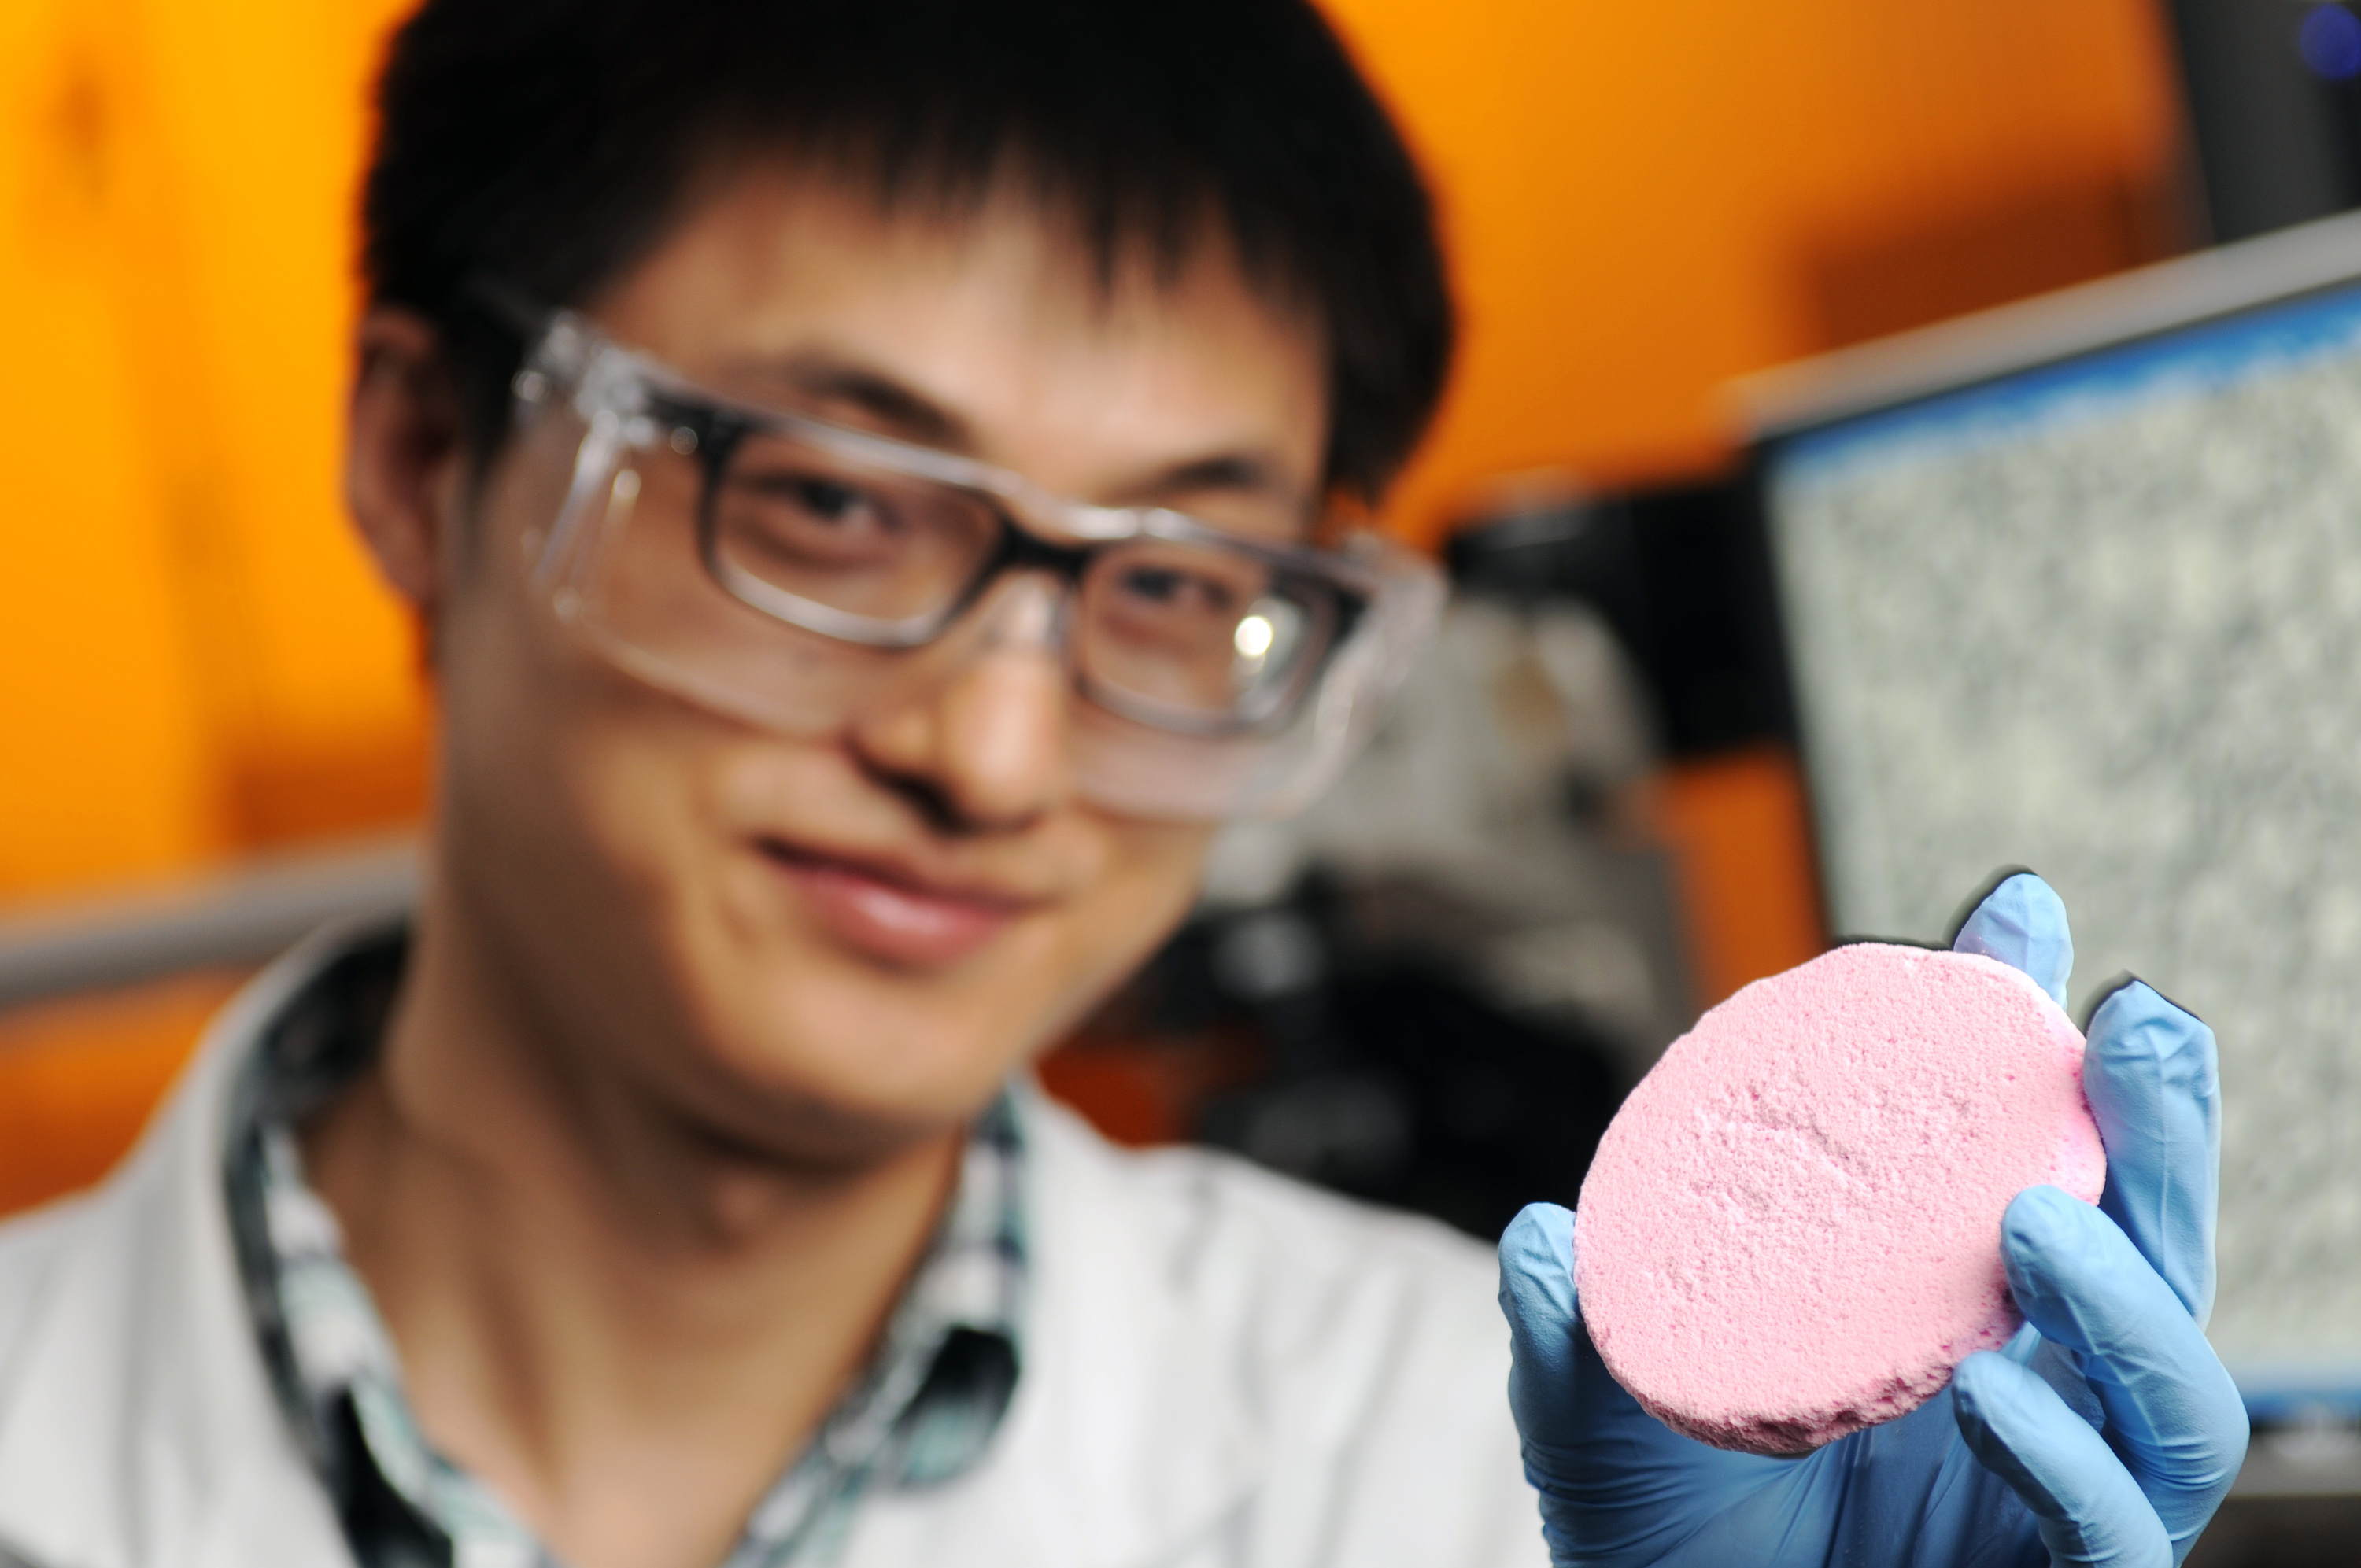 Yi Zhang, a graduate student co-advised by Prof. Sven Behrens and Prof. Carson Meredith in the School of Chemical &amp; Biomolecular Engineering at Georgia Tech, is shown holding a porous solid material prepared from a capillary foam. (Credit: Gary Meek)